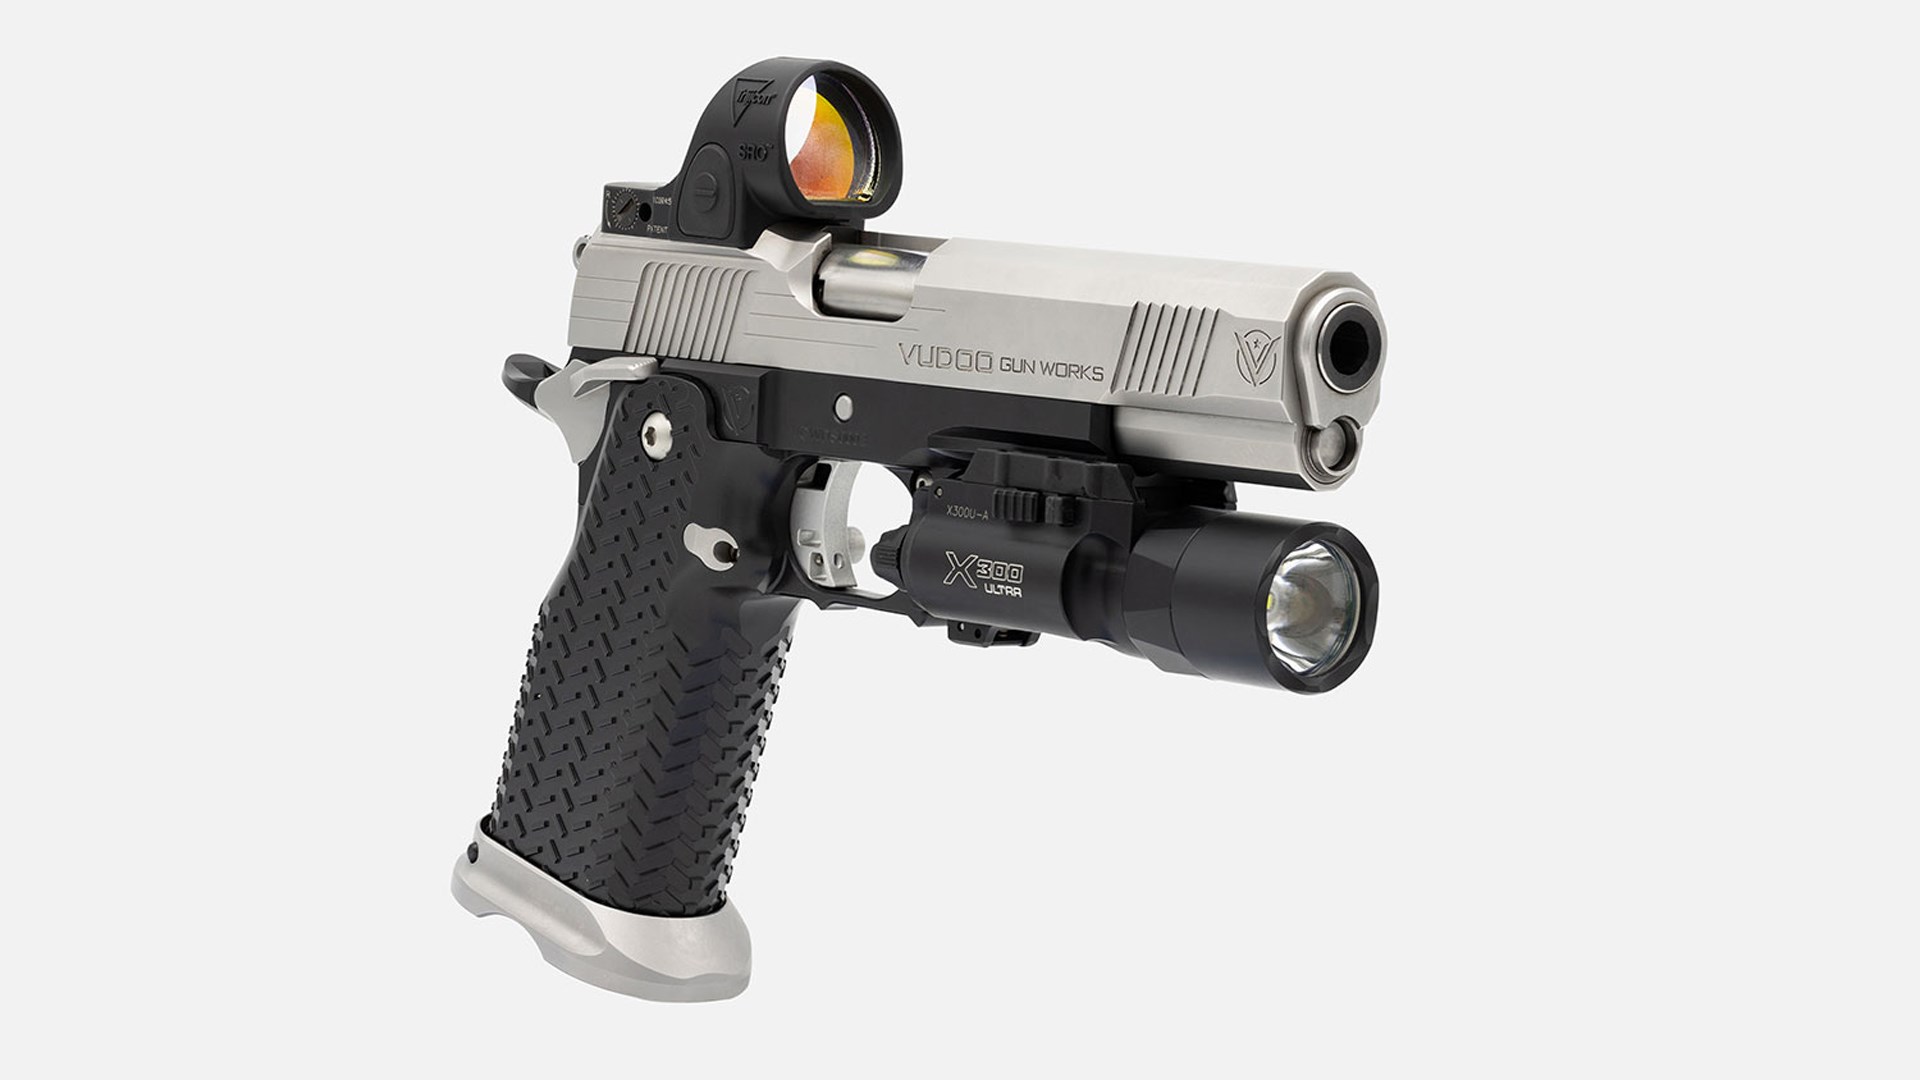 Right side of the Vudoo Priest double-stack pistol, shown with a light mounted to its frame and a red-dot optic on its slide.